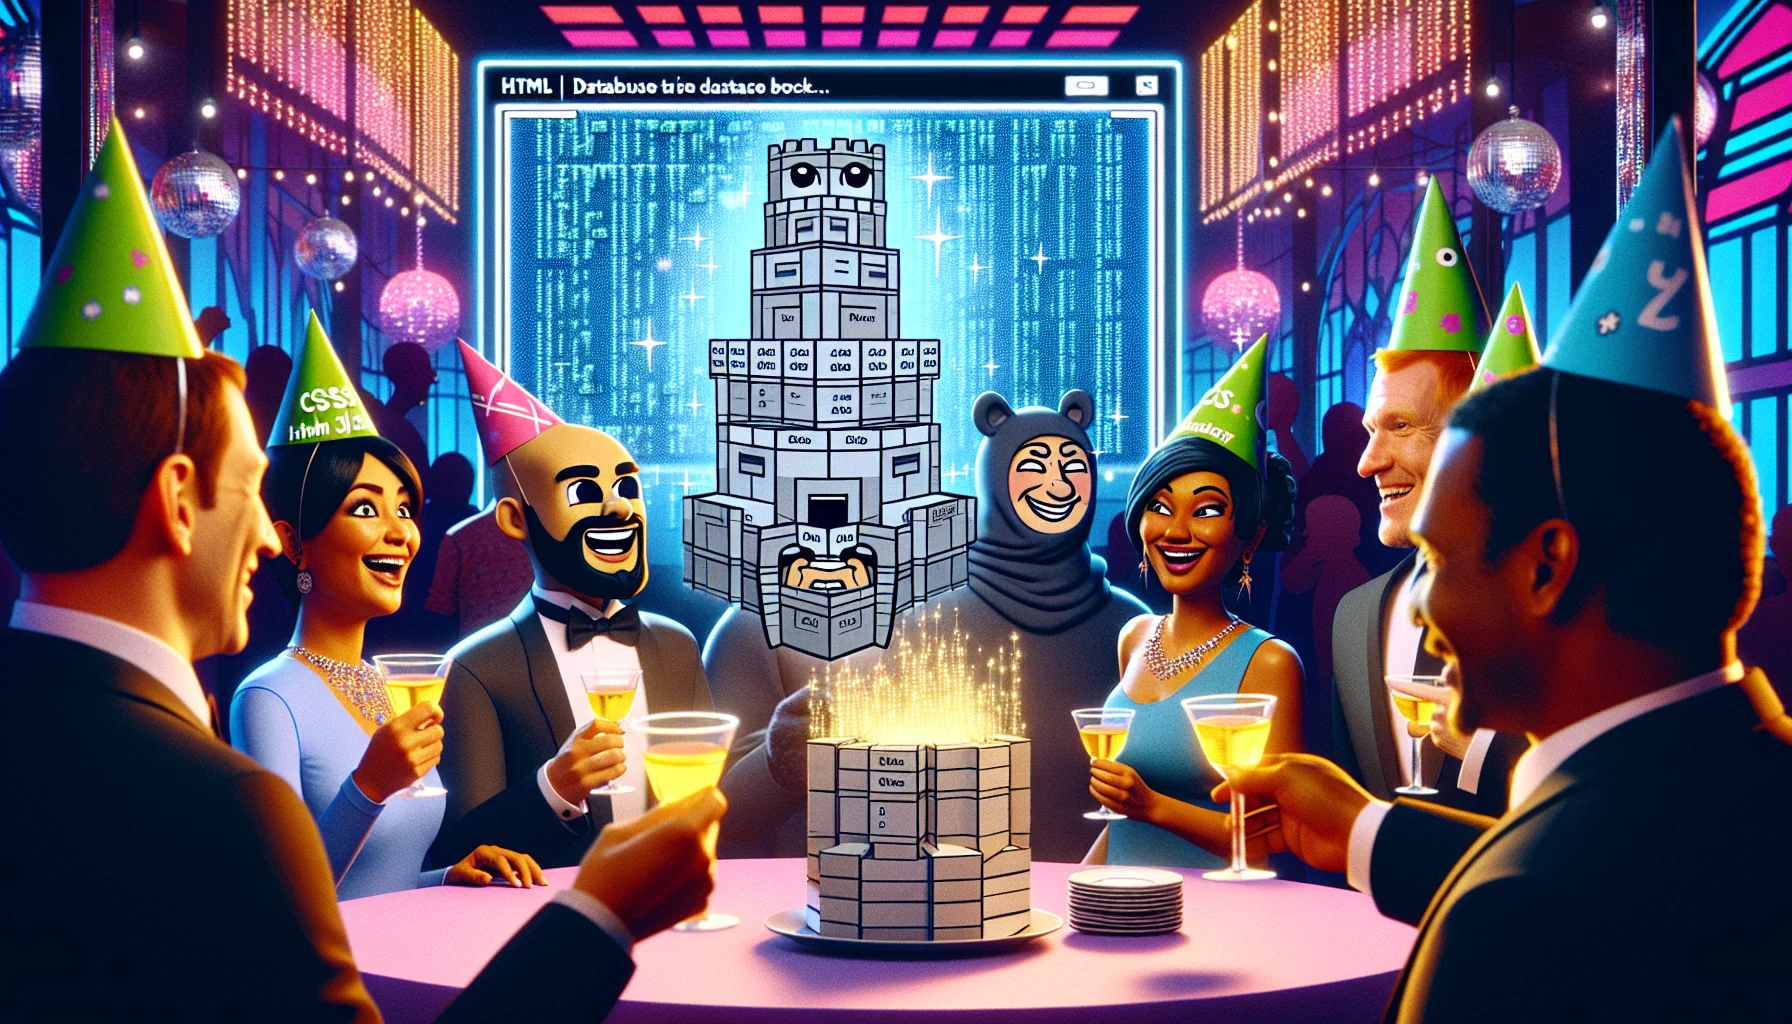 In a humorous twist, imagine a web hosting party set in a vibrant, lively setting with glowing disco lights. There's a large, digital screen displaying a sophisticated, animated website builder program. The program has anthropomorphic features and is comically engaged in building a virtual 'database castle,' each brick representing data blocks. The castle sparkles with every data addition, eliciting cheer and laughter from a diverse crowd of enthusiastic onlookers. Among them you'll see a Middle-Eastern woman and a Black man, both professional web developers, wearing novelty 'HTML' and 'CSS' party hats, chuckling at the spectacle and clinking their glasses in a festive toast.